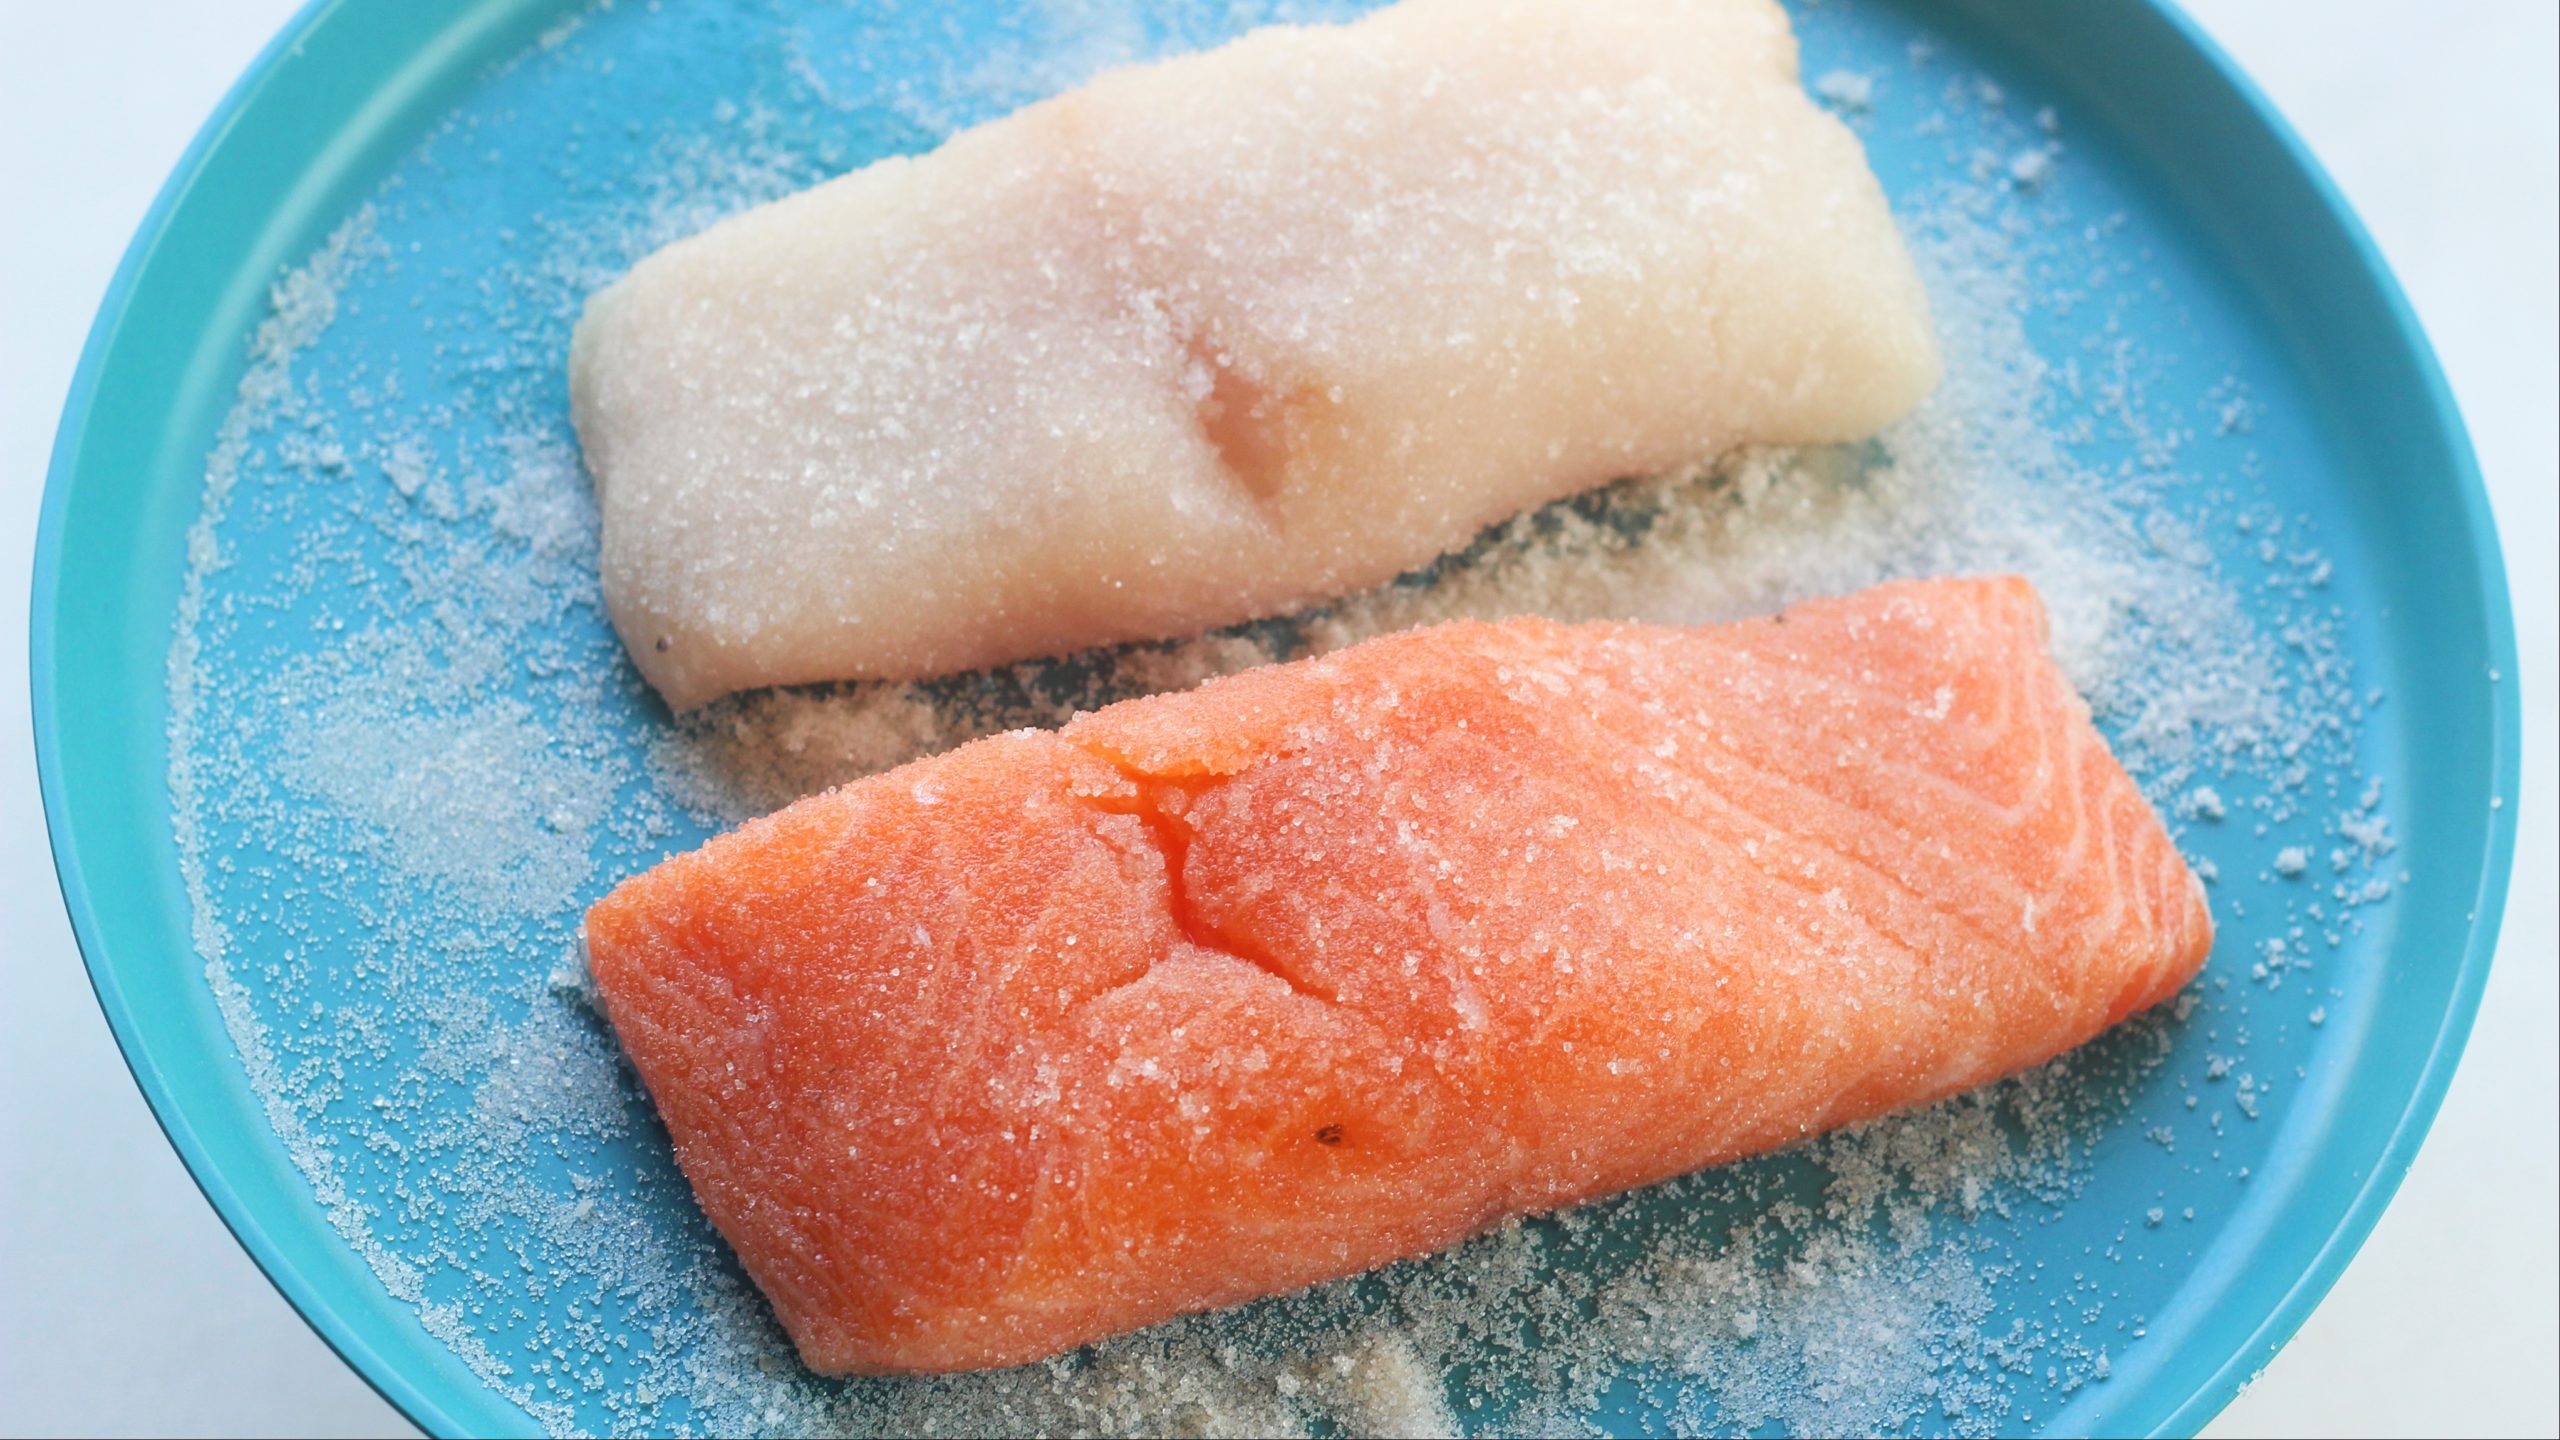 Fix Your Dull Fish With a Salt and Sugar Cure